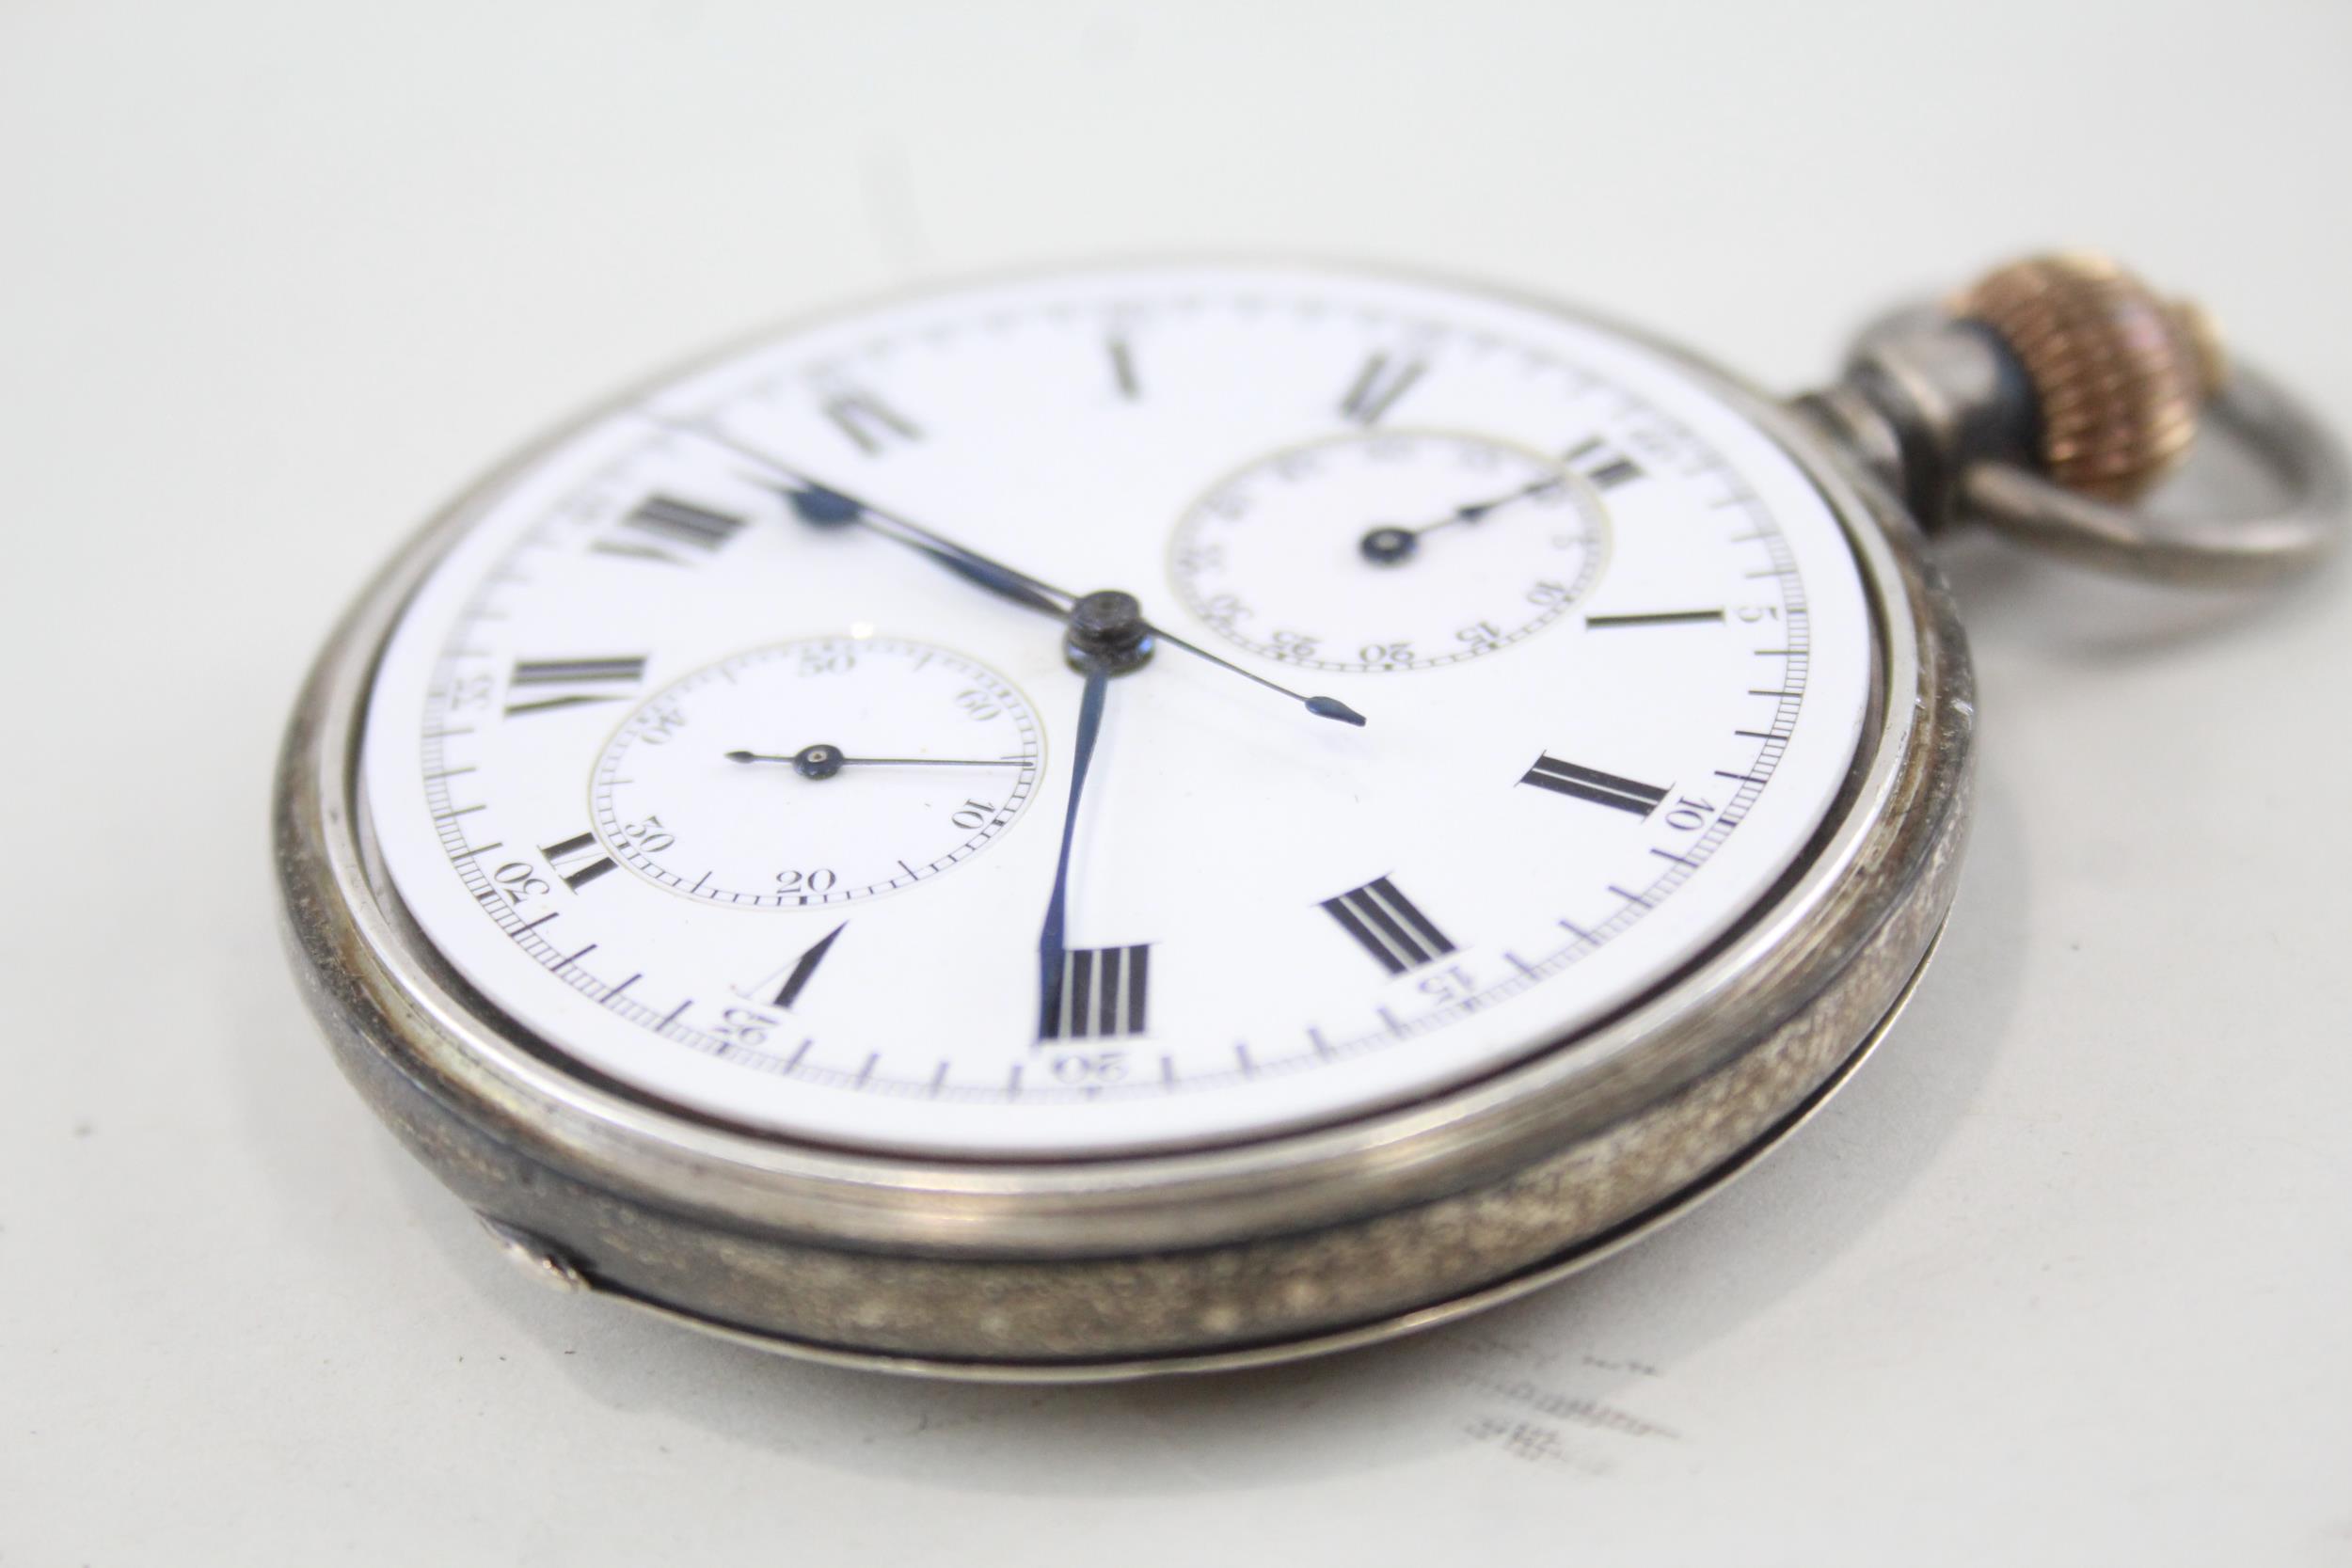 Sterling Silver Vintage Up Down Chronograph Stop Watch Hand-wind WORKING - Sterling Silver Vintage - Image 6 of 6